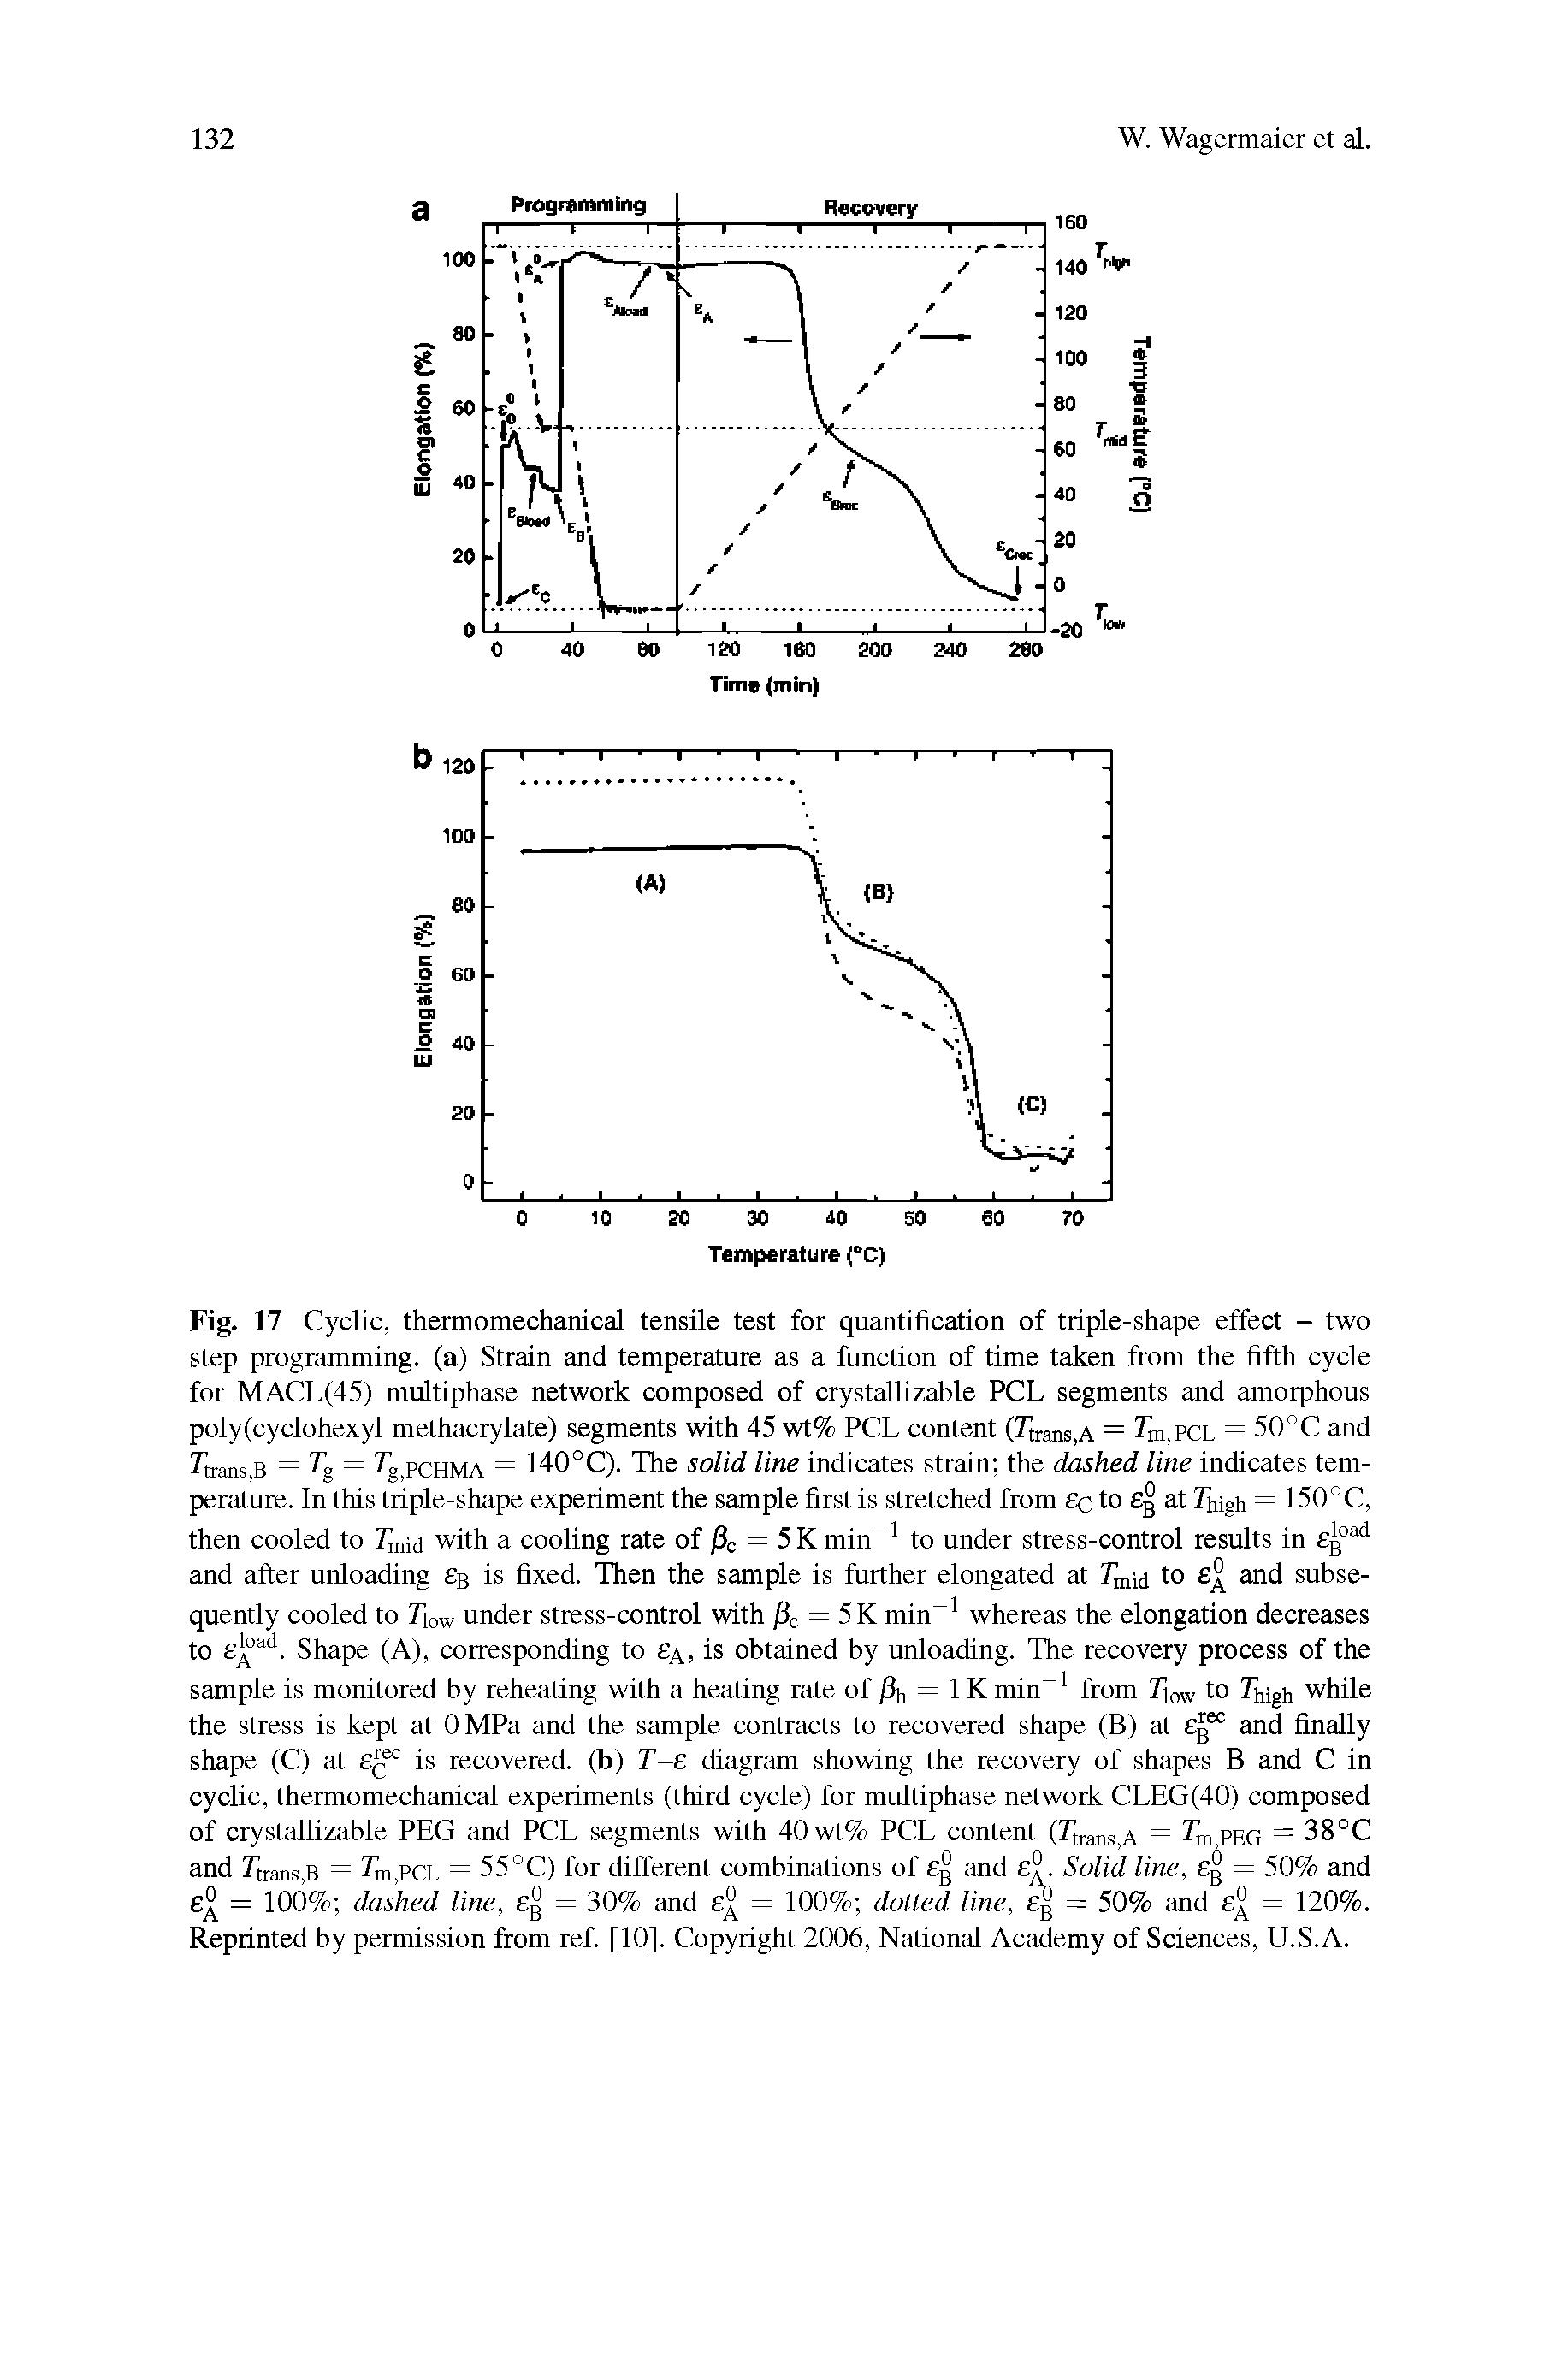 Fig. 17 Cyclic, thermomechanical tensile test for quantification of triple-shape effect - two step programming, (a) Strain and temperature as a function of time taken from the fifth cycle for MACL(45) multiphase network composed of crystallizable PCL segments and amorphous poly(cyclohexyl methacrylate) segments with 45 wt% PCL content (rtrans,A = Tm.PCL = 50°C and Ftrans.B = = Fg pcHMA = 140°C). The solid line indicates strain the dashed line indicates tem-...